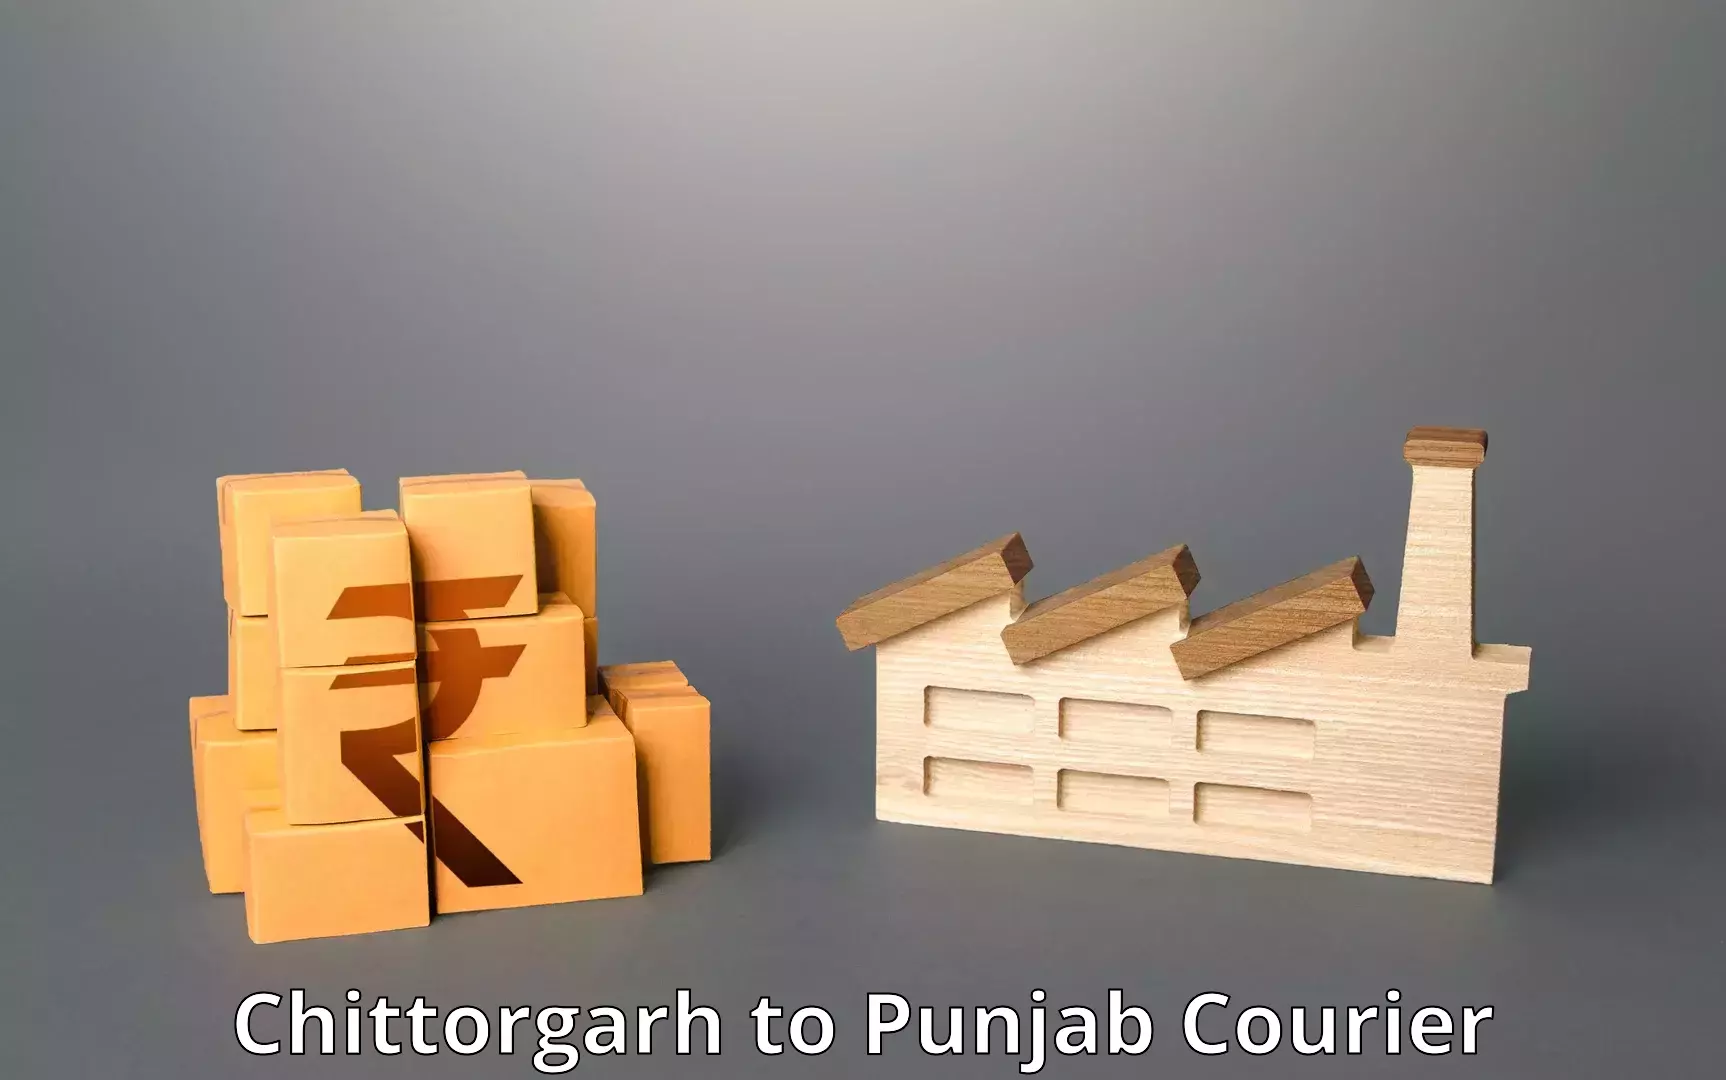 Reliable delivery network Chittorgarh to Punjab